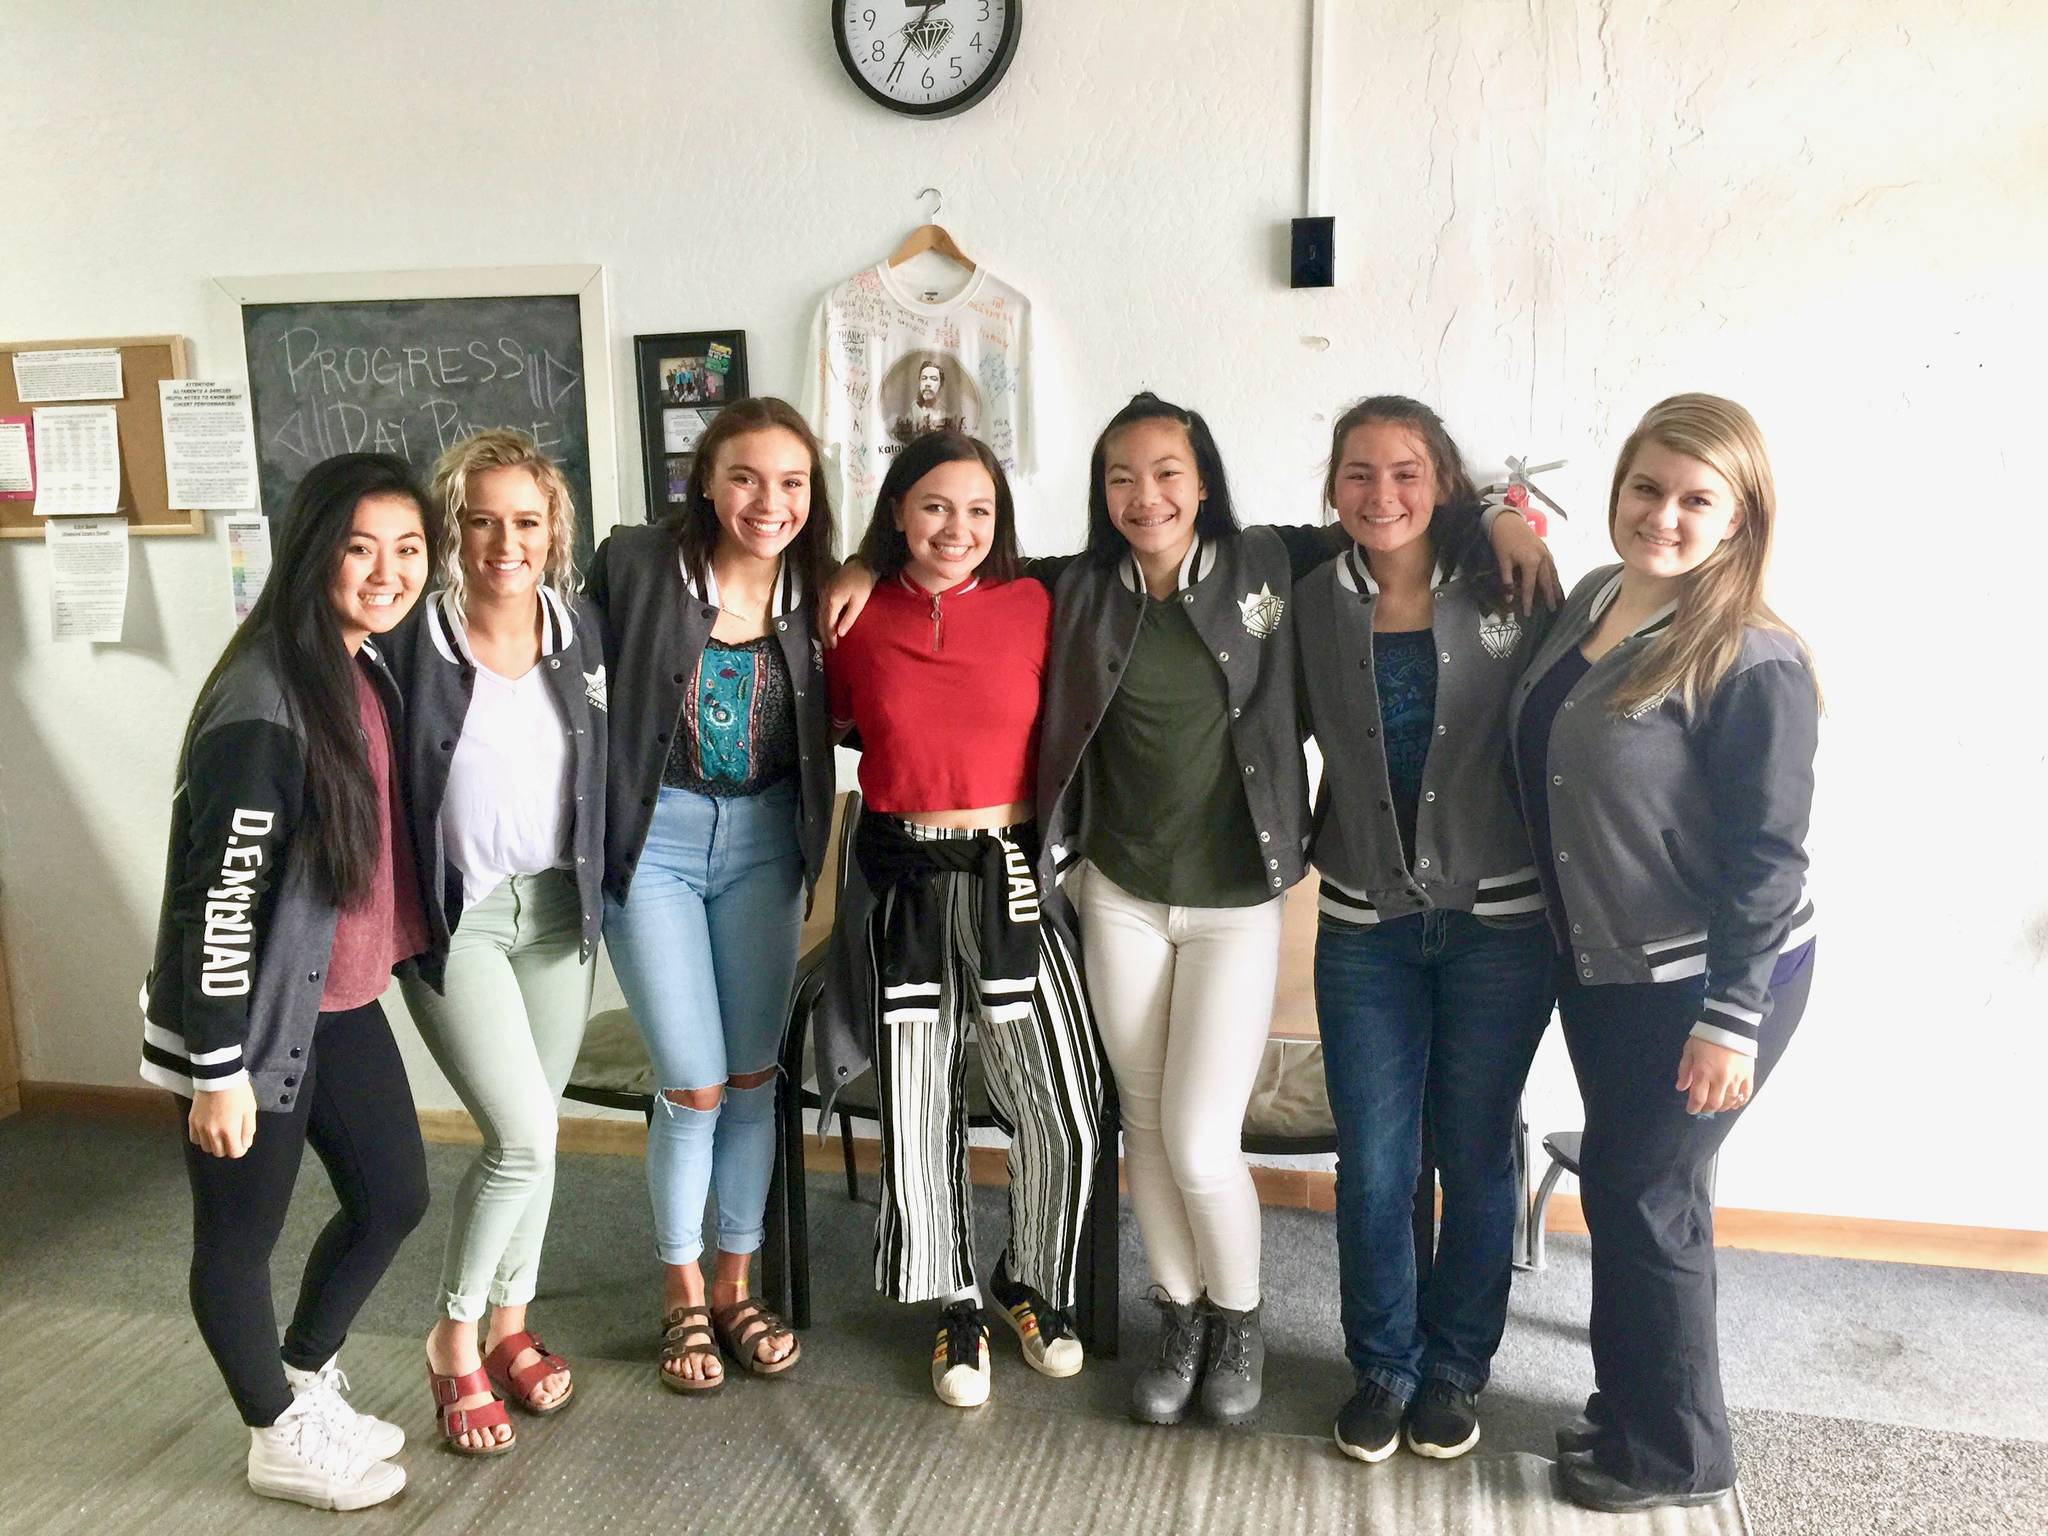 The seven dancers, Caroline Cho, Rylee Downs, Autianna Spann, Shanna Anderson, Ysabelle Soyangco, Siobhan Dempsey and Shelby Anglebrandt get ready for their trip to Akita, Japan on Wednesday, near Kenai. (Photo by Victoria Petersen/Peninsula Clarion)